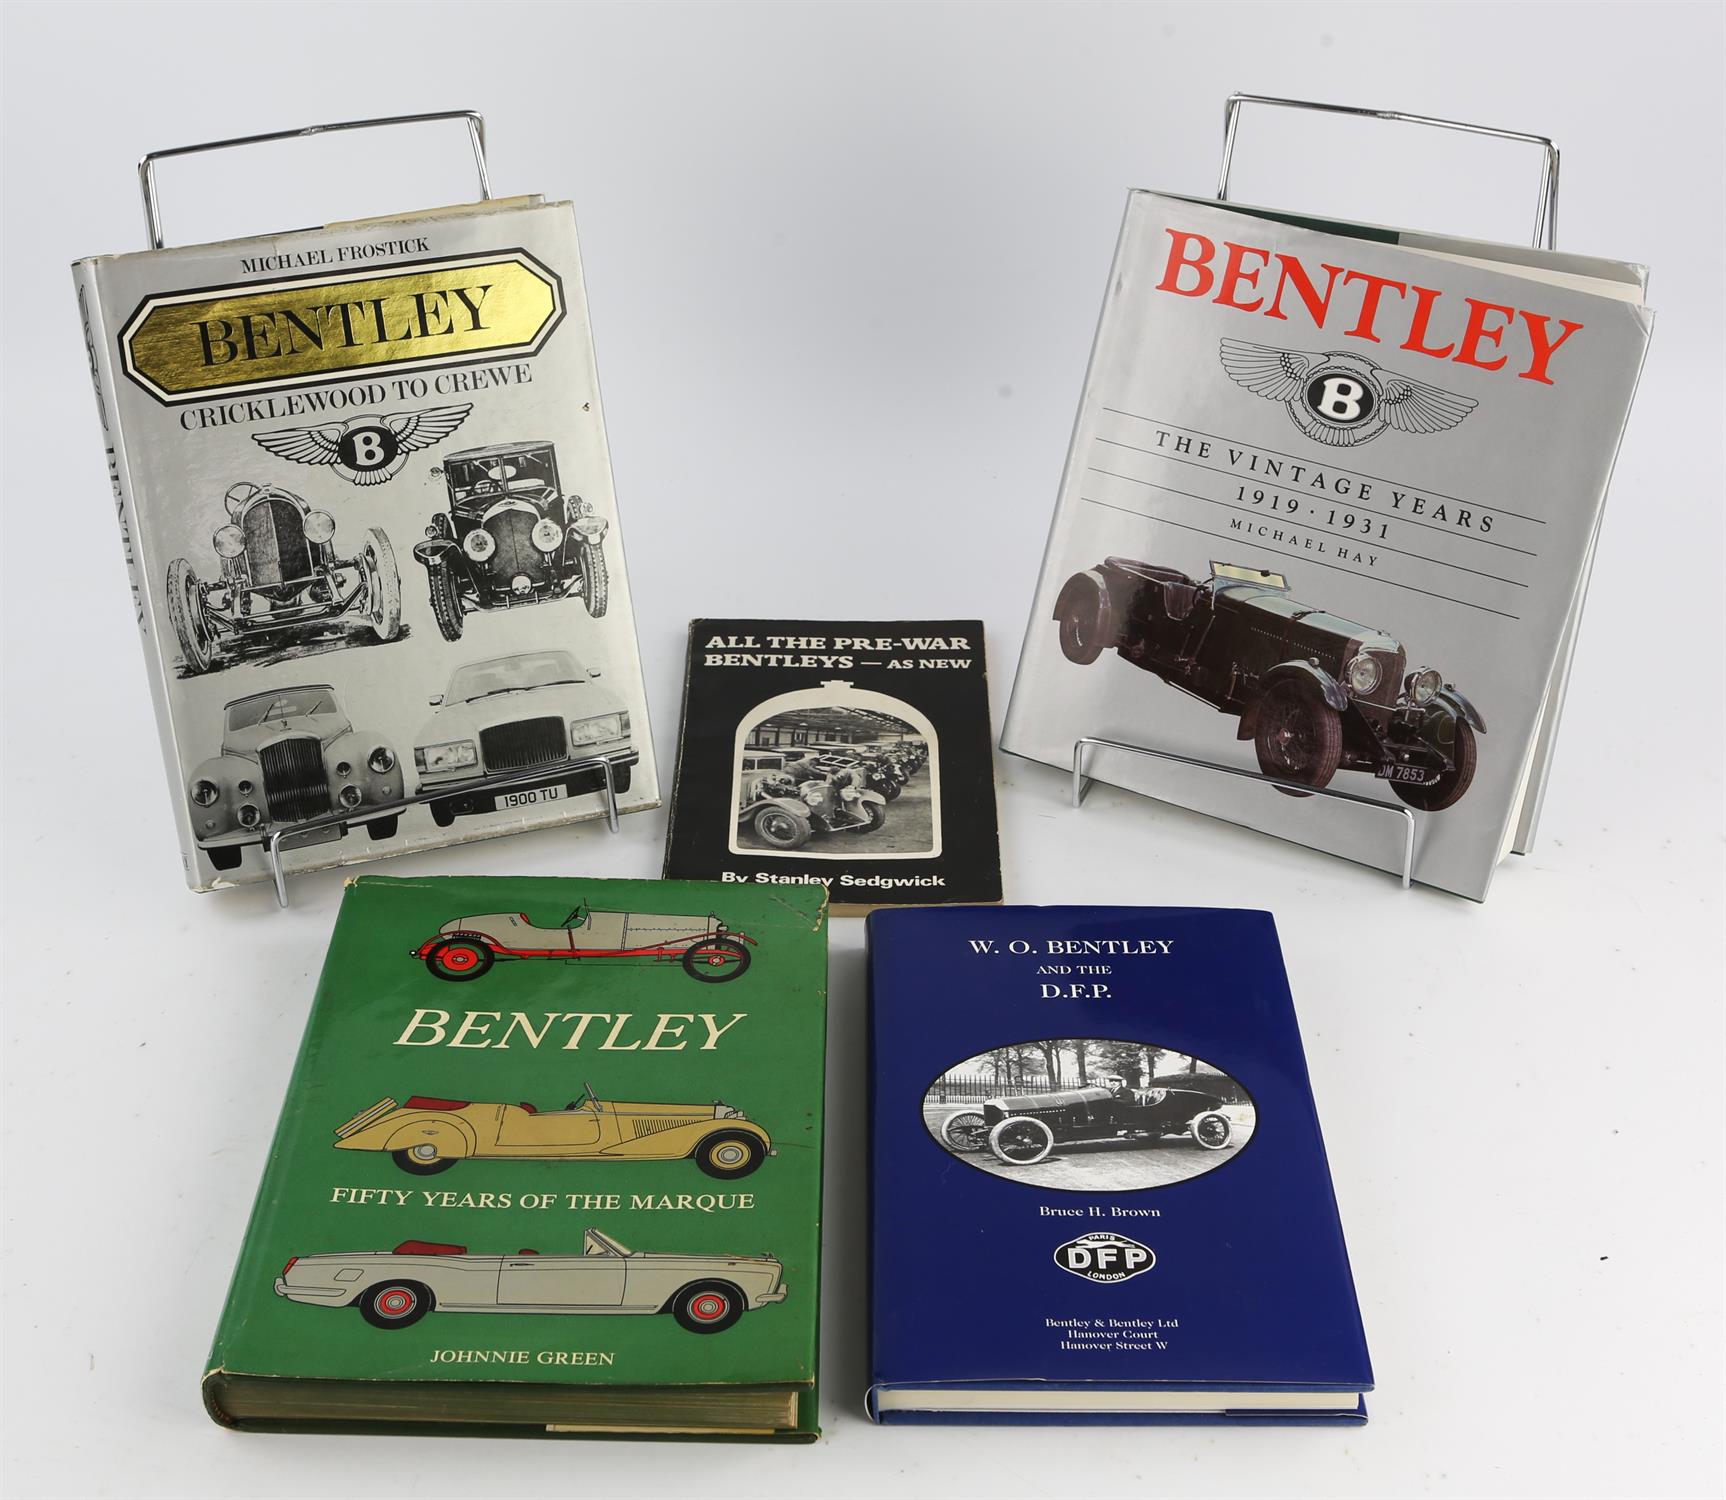 5 Bentley books - To include The Vintage Years 1919-1931 by Michael Hay, Bentley Cricklewood to